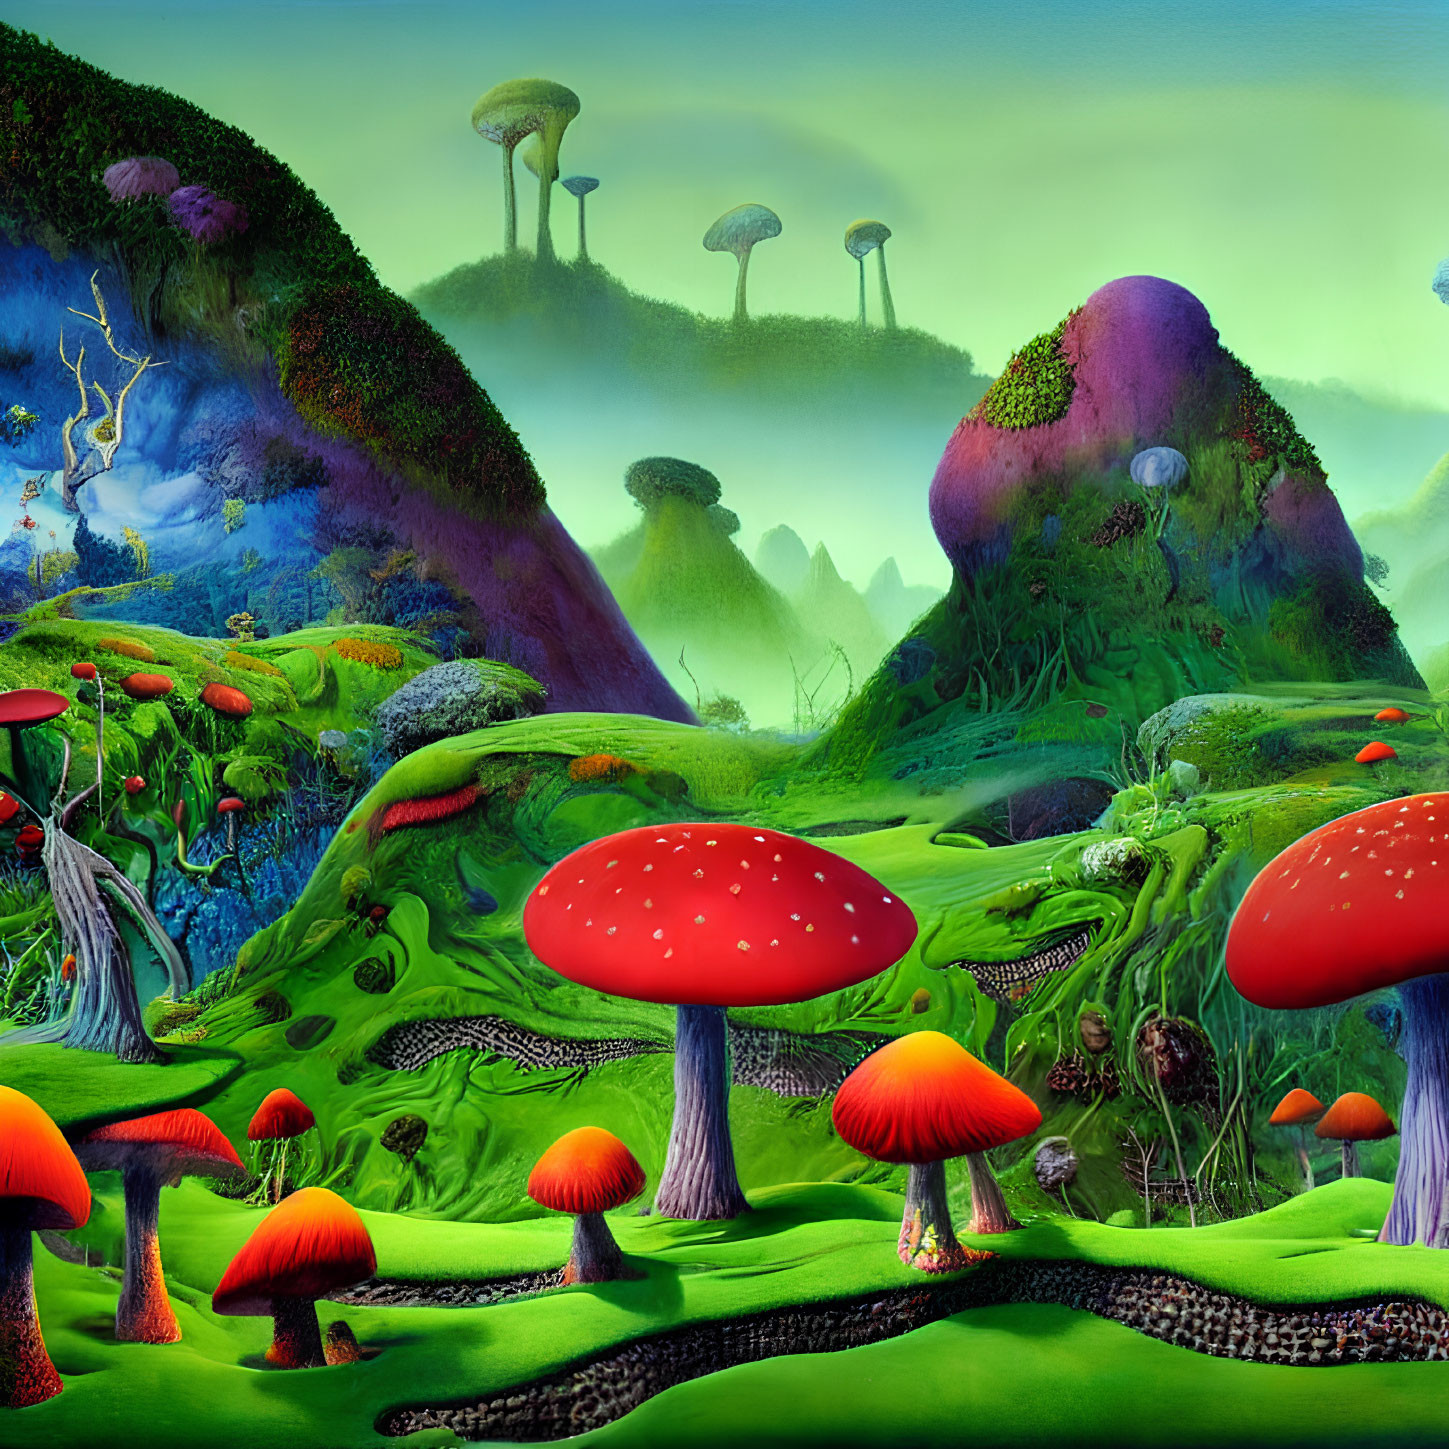 Colorful fantasy landscape with oversized red mushrooms and whimsical structures.